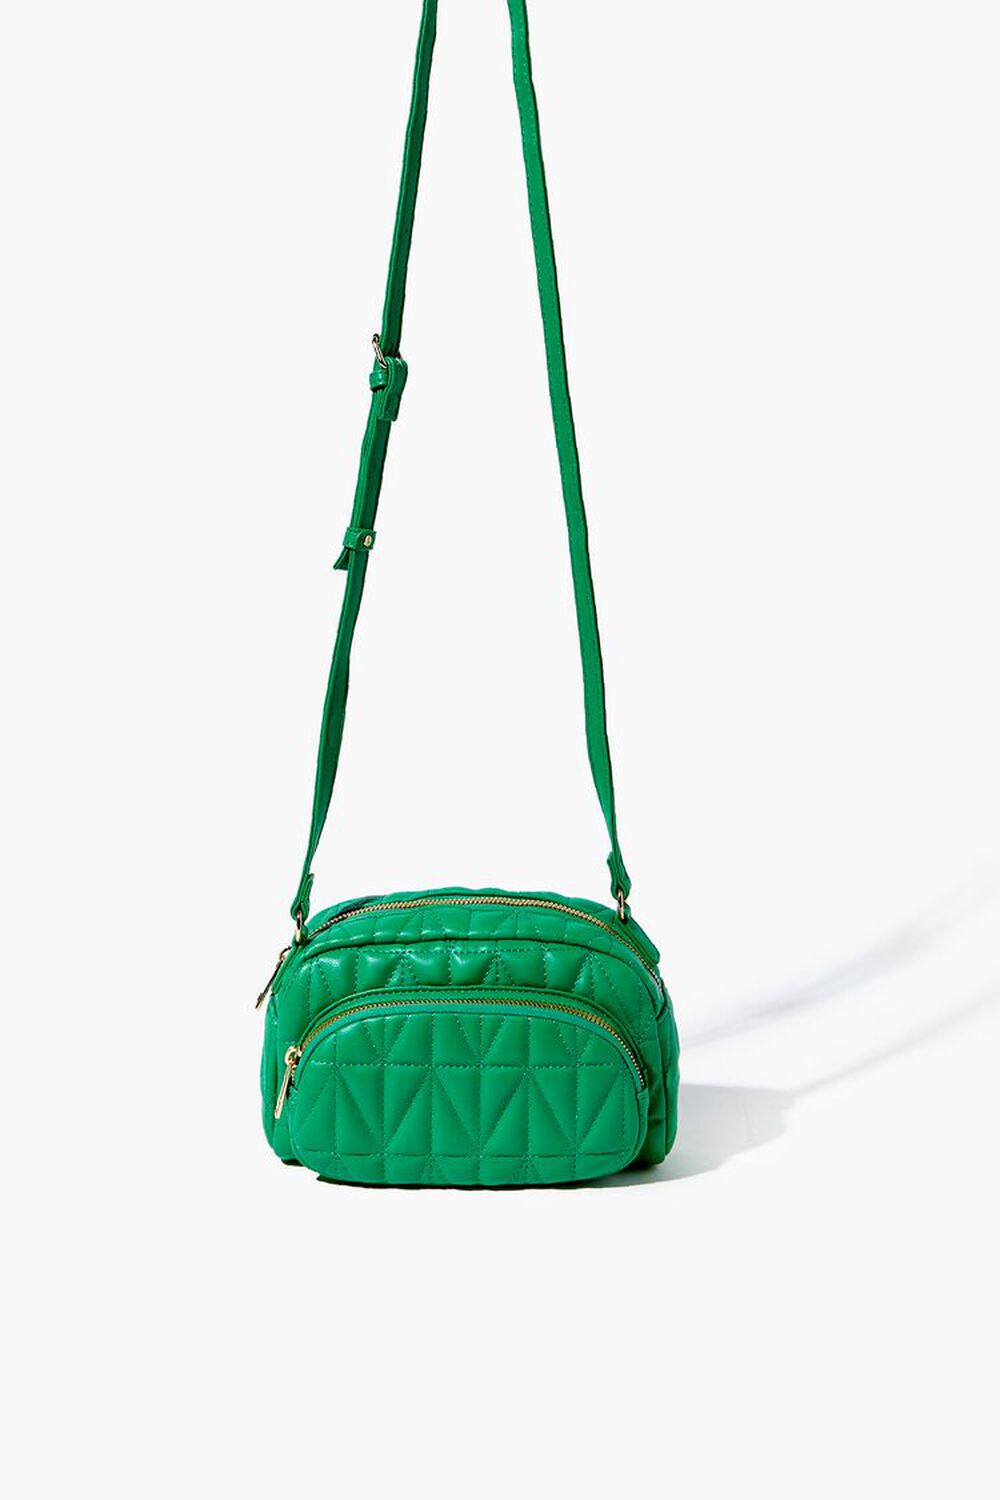 GREEN Quilted Faux Leather Crossbody Bag, image 1